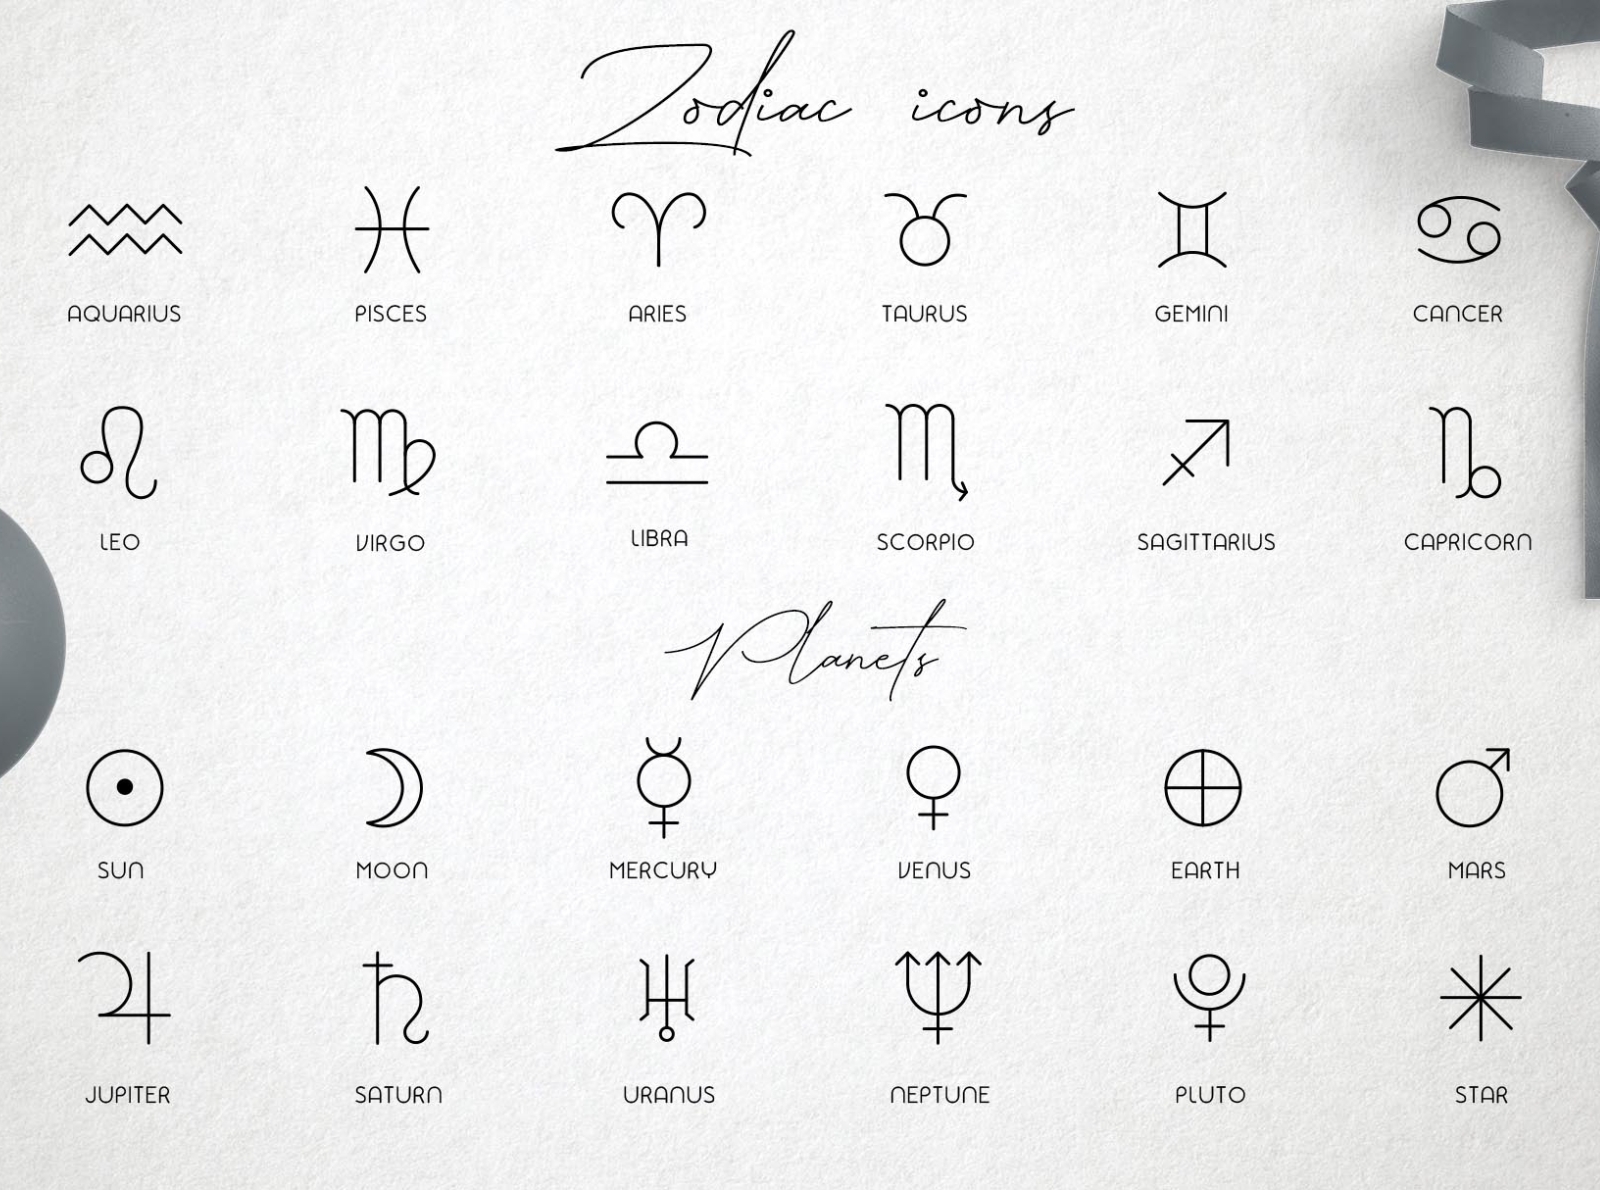 Zodiac Signs and Constellations by Yana Alisovna on Dribbble